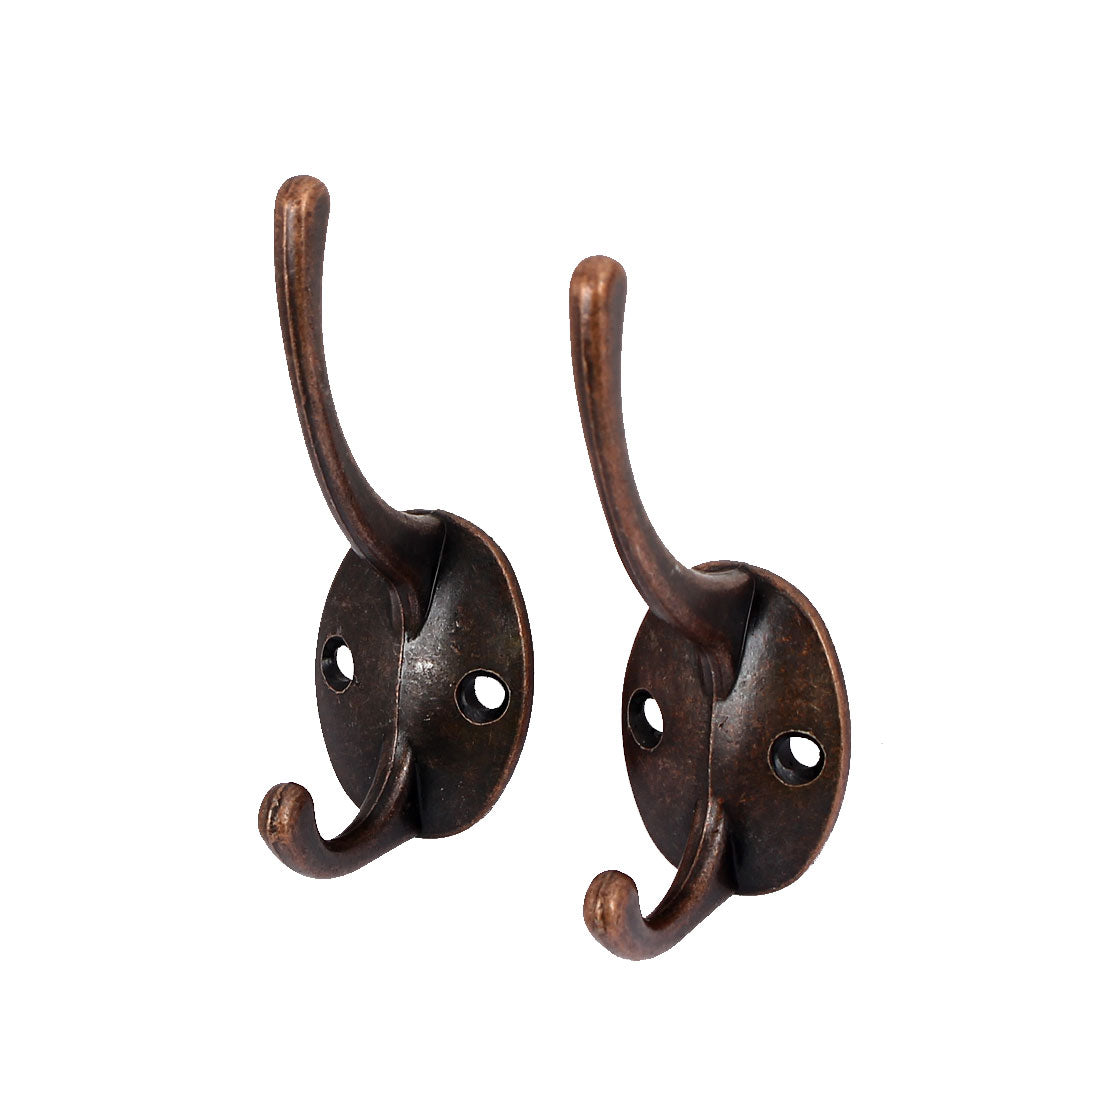 uxcell Uxcell Bedroom Clothes Coat Hanging Wall Mounted Metal Double Hanger Hook Copper Tone 2pcs